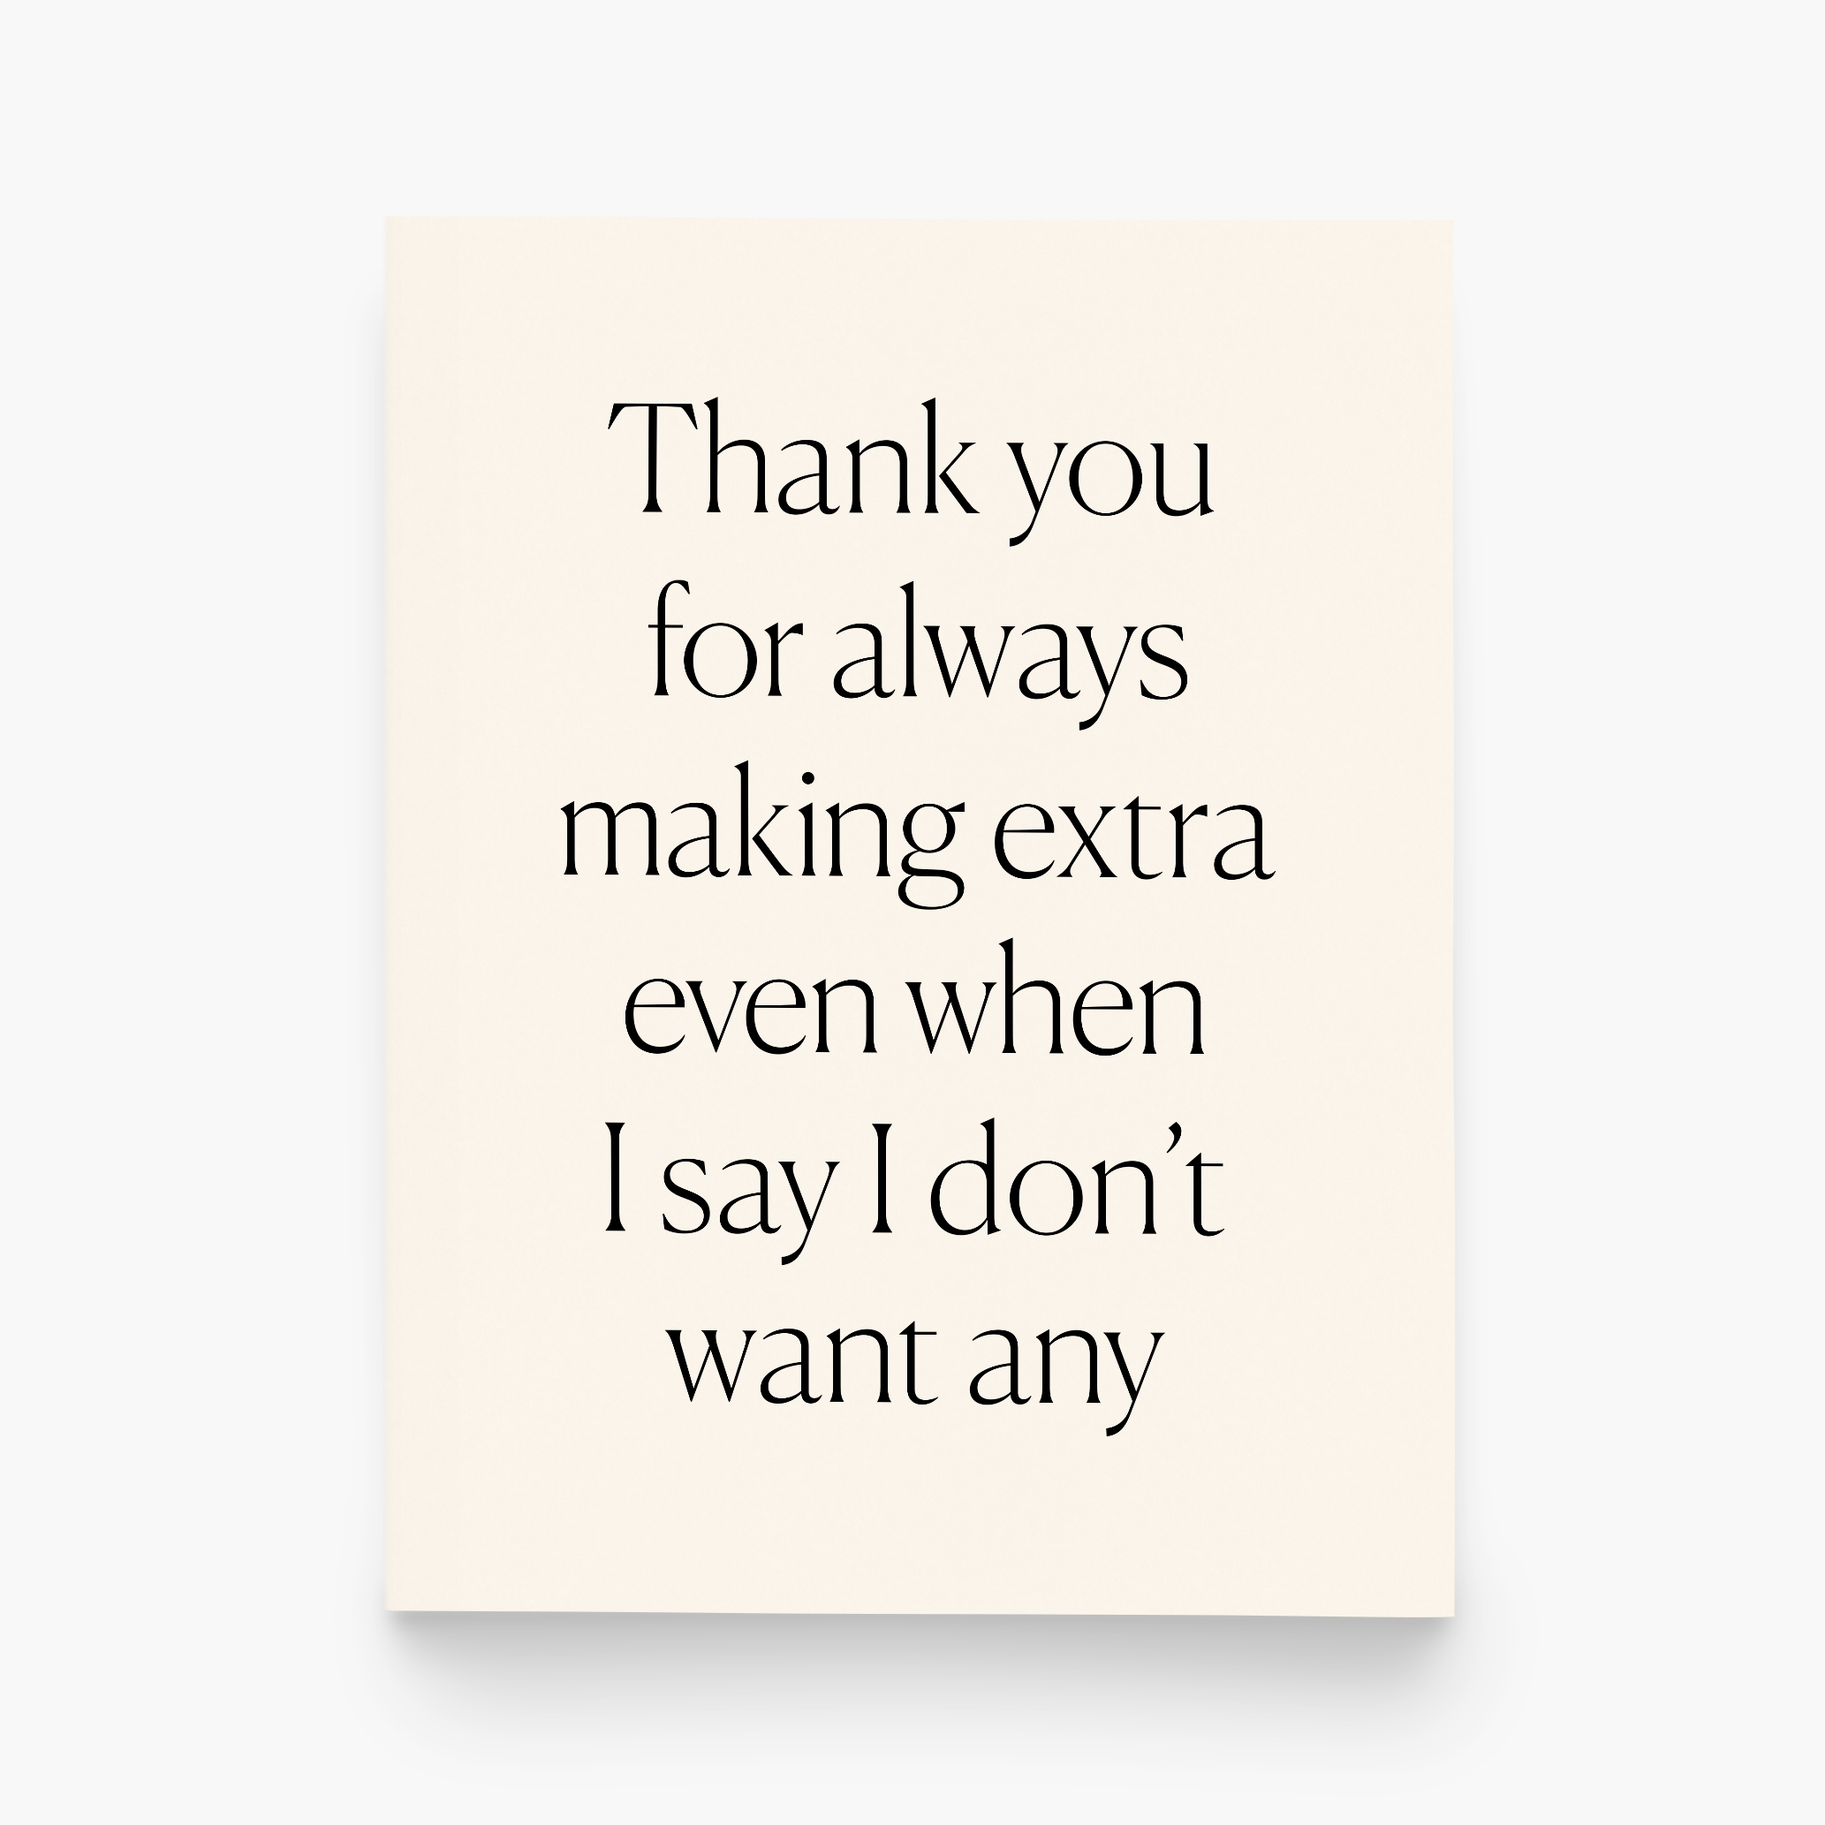 Thank You For Always Making Extra Even When I Say I Don't Want Any - Greeting Card - Mellow Monkey